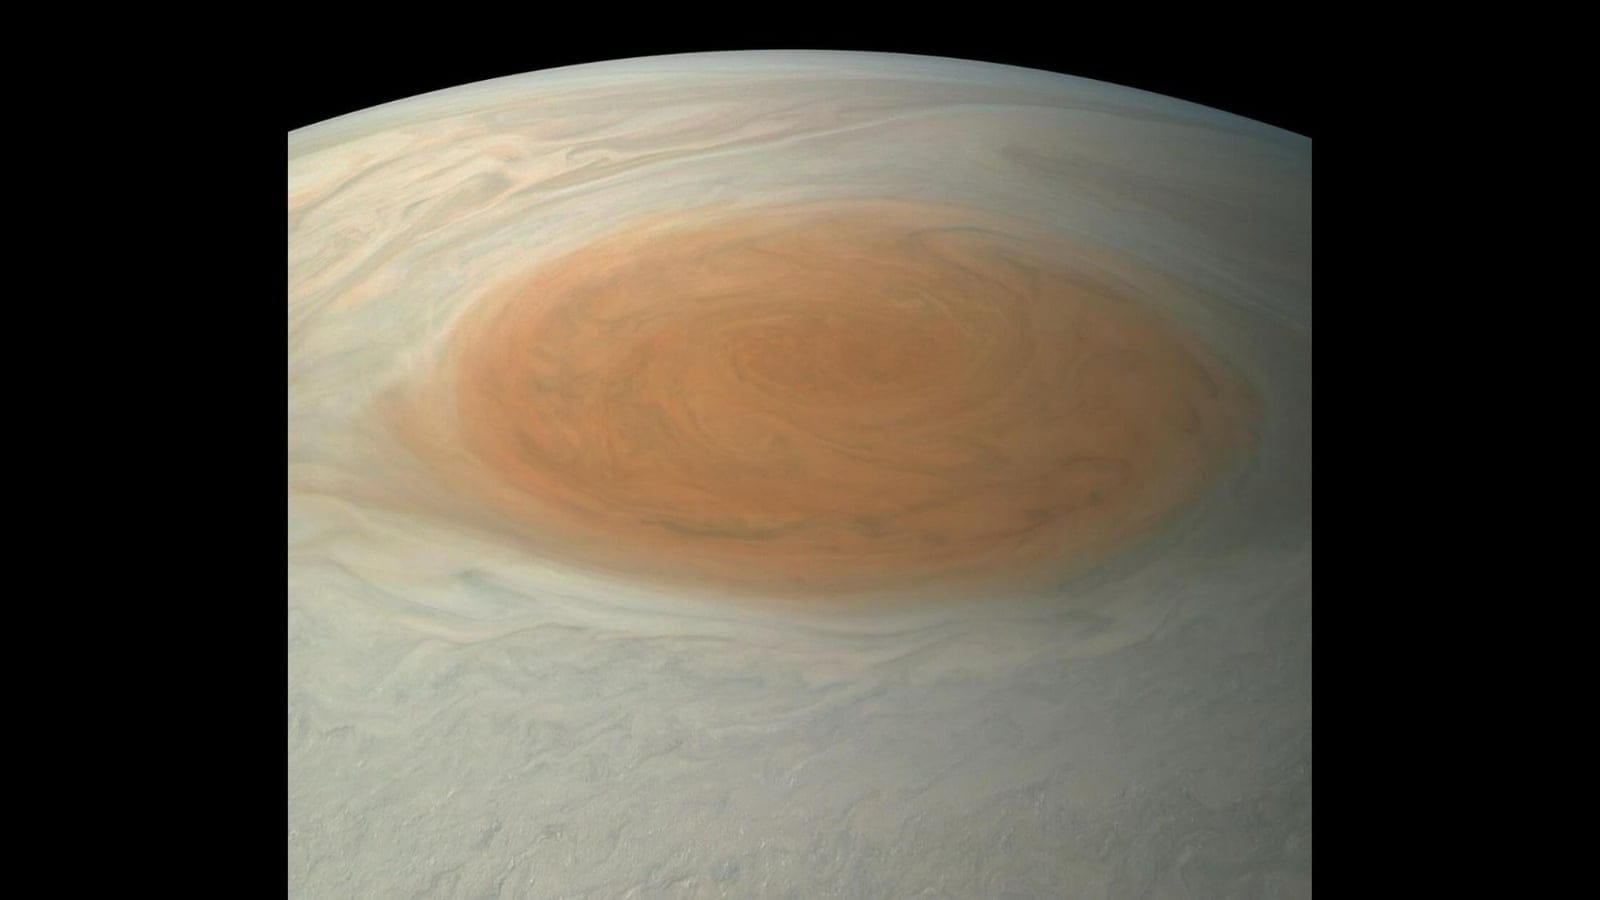 NASA’s Juno captures stunning pic of Jupiter’s Great Red Spot, it’s ‘twice as large as Earth’